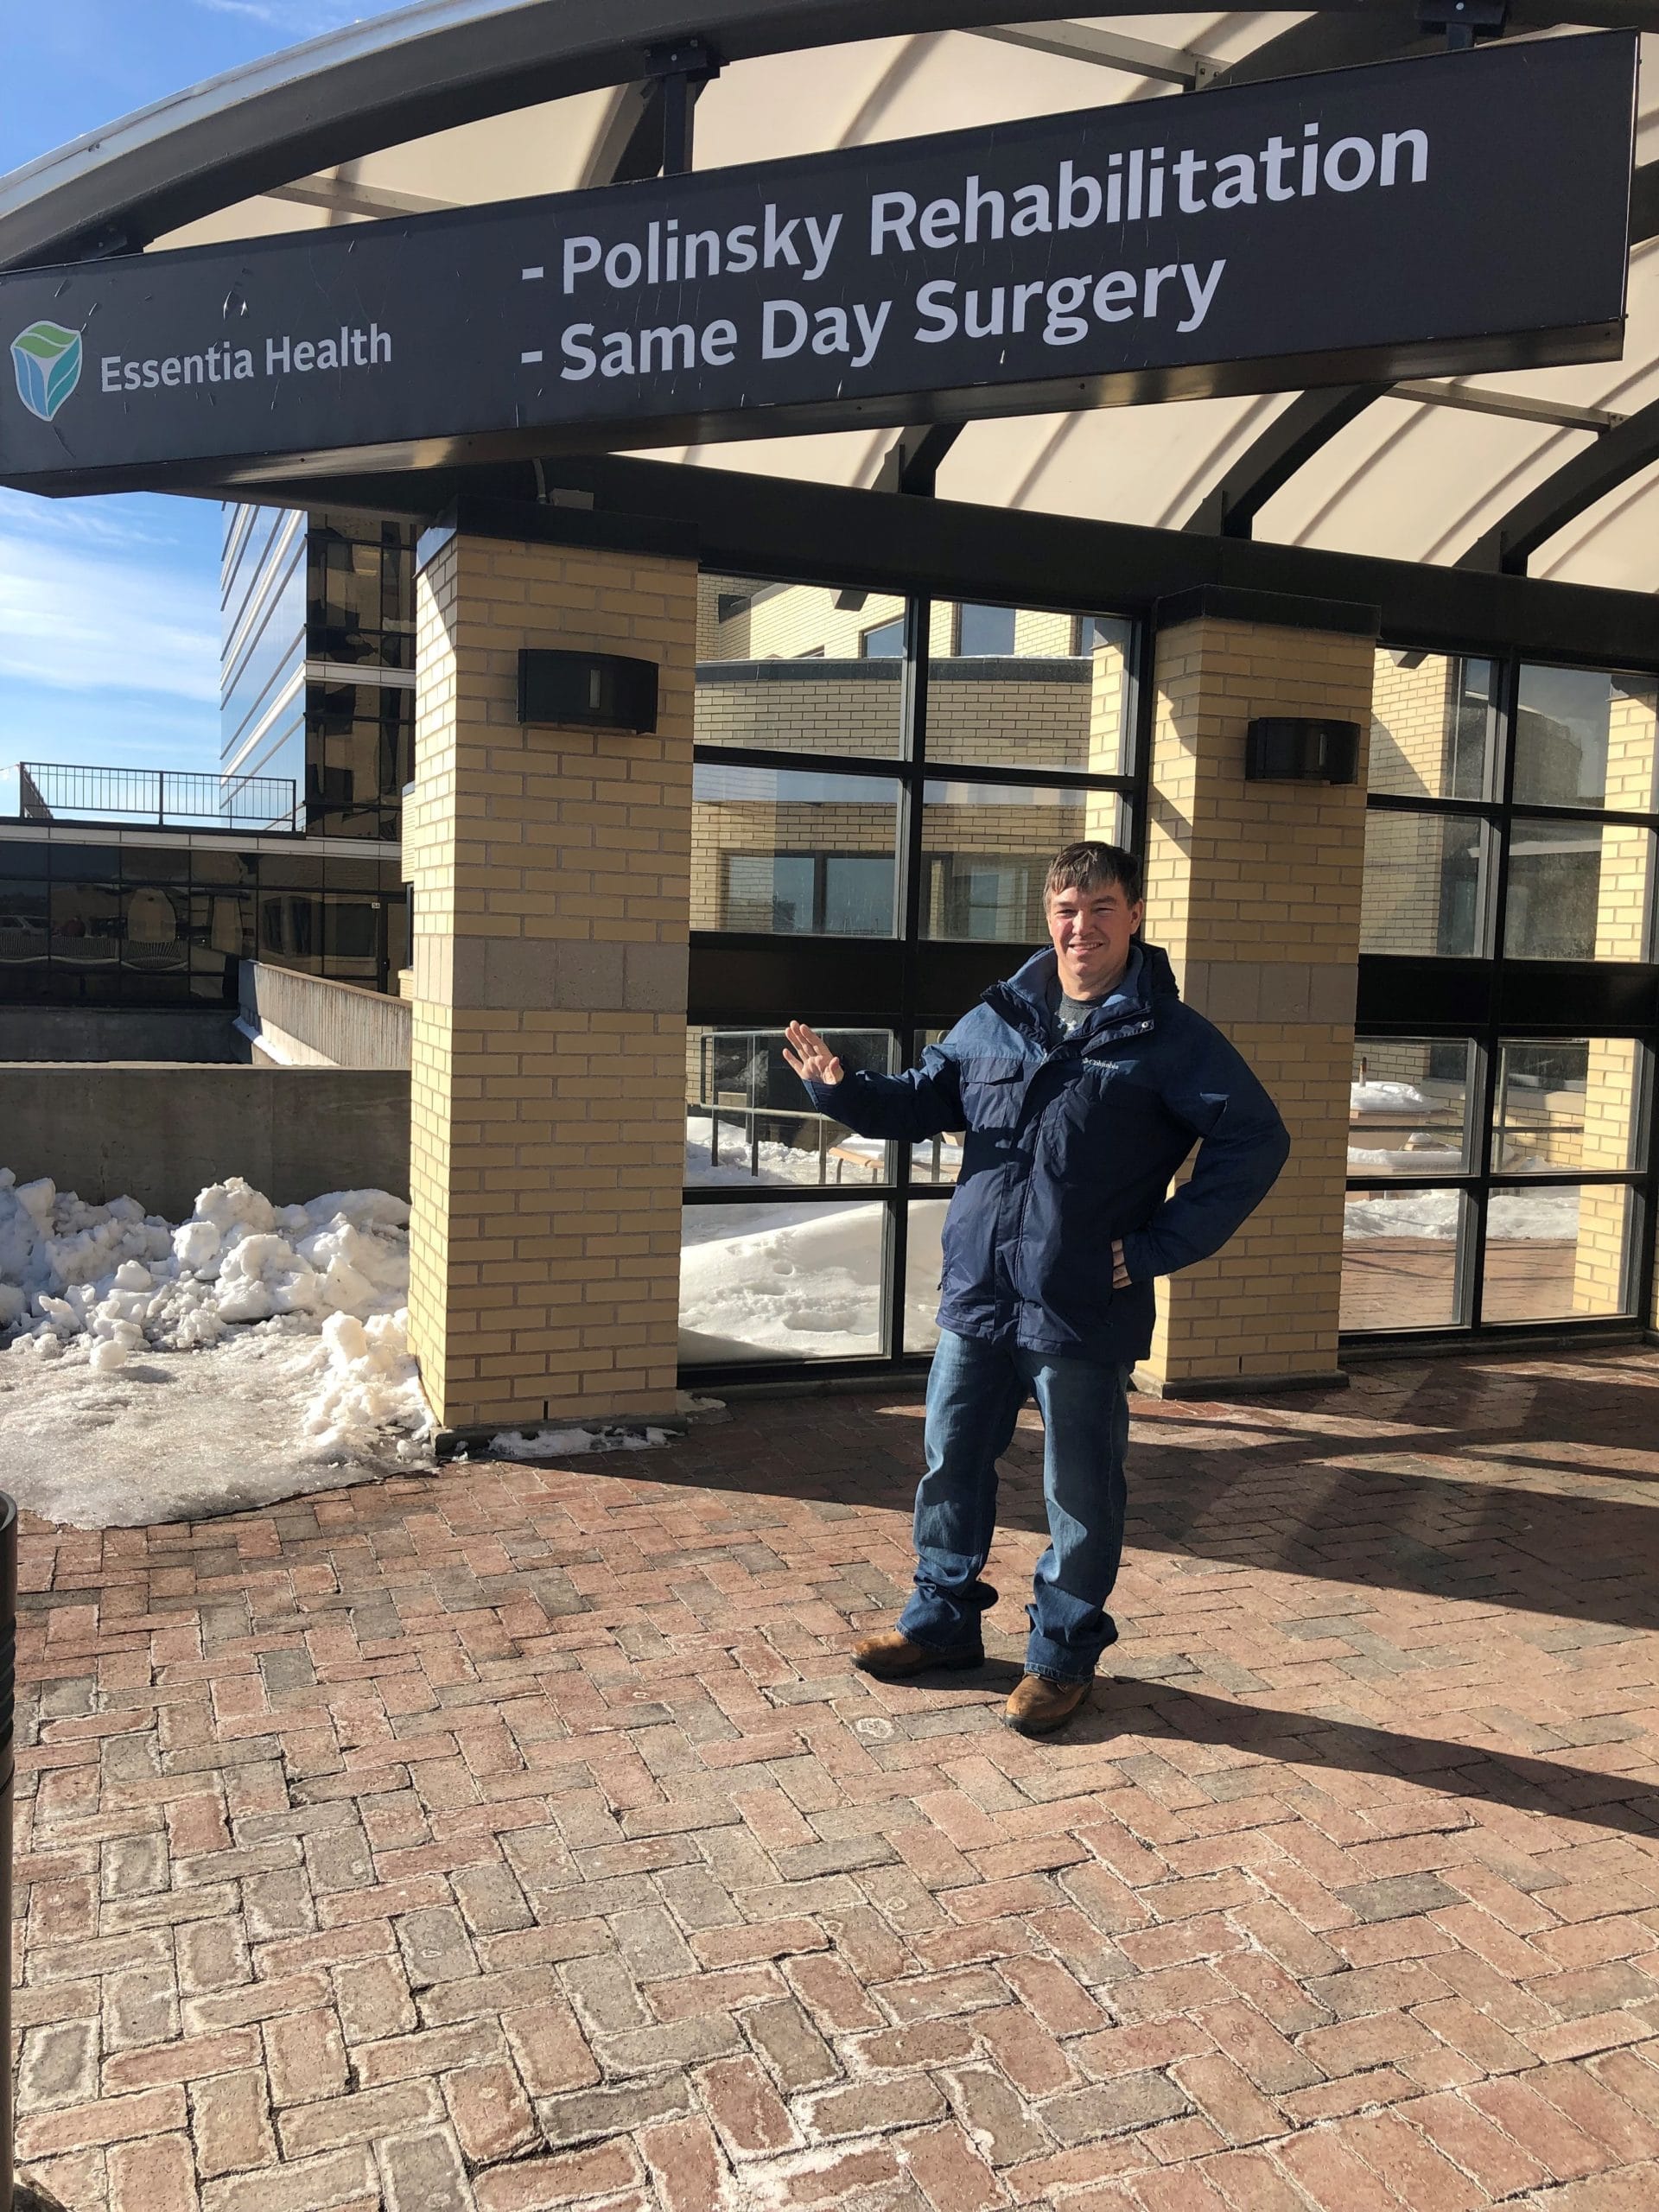 Mike S. standing outside Essentia Health rehabilitation and surgery center.